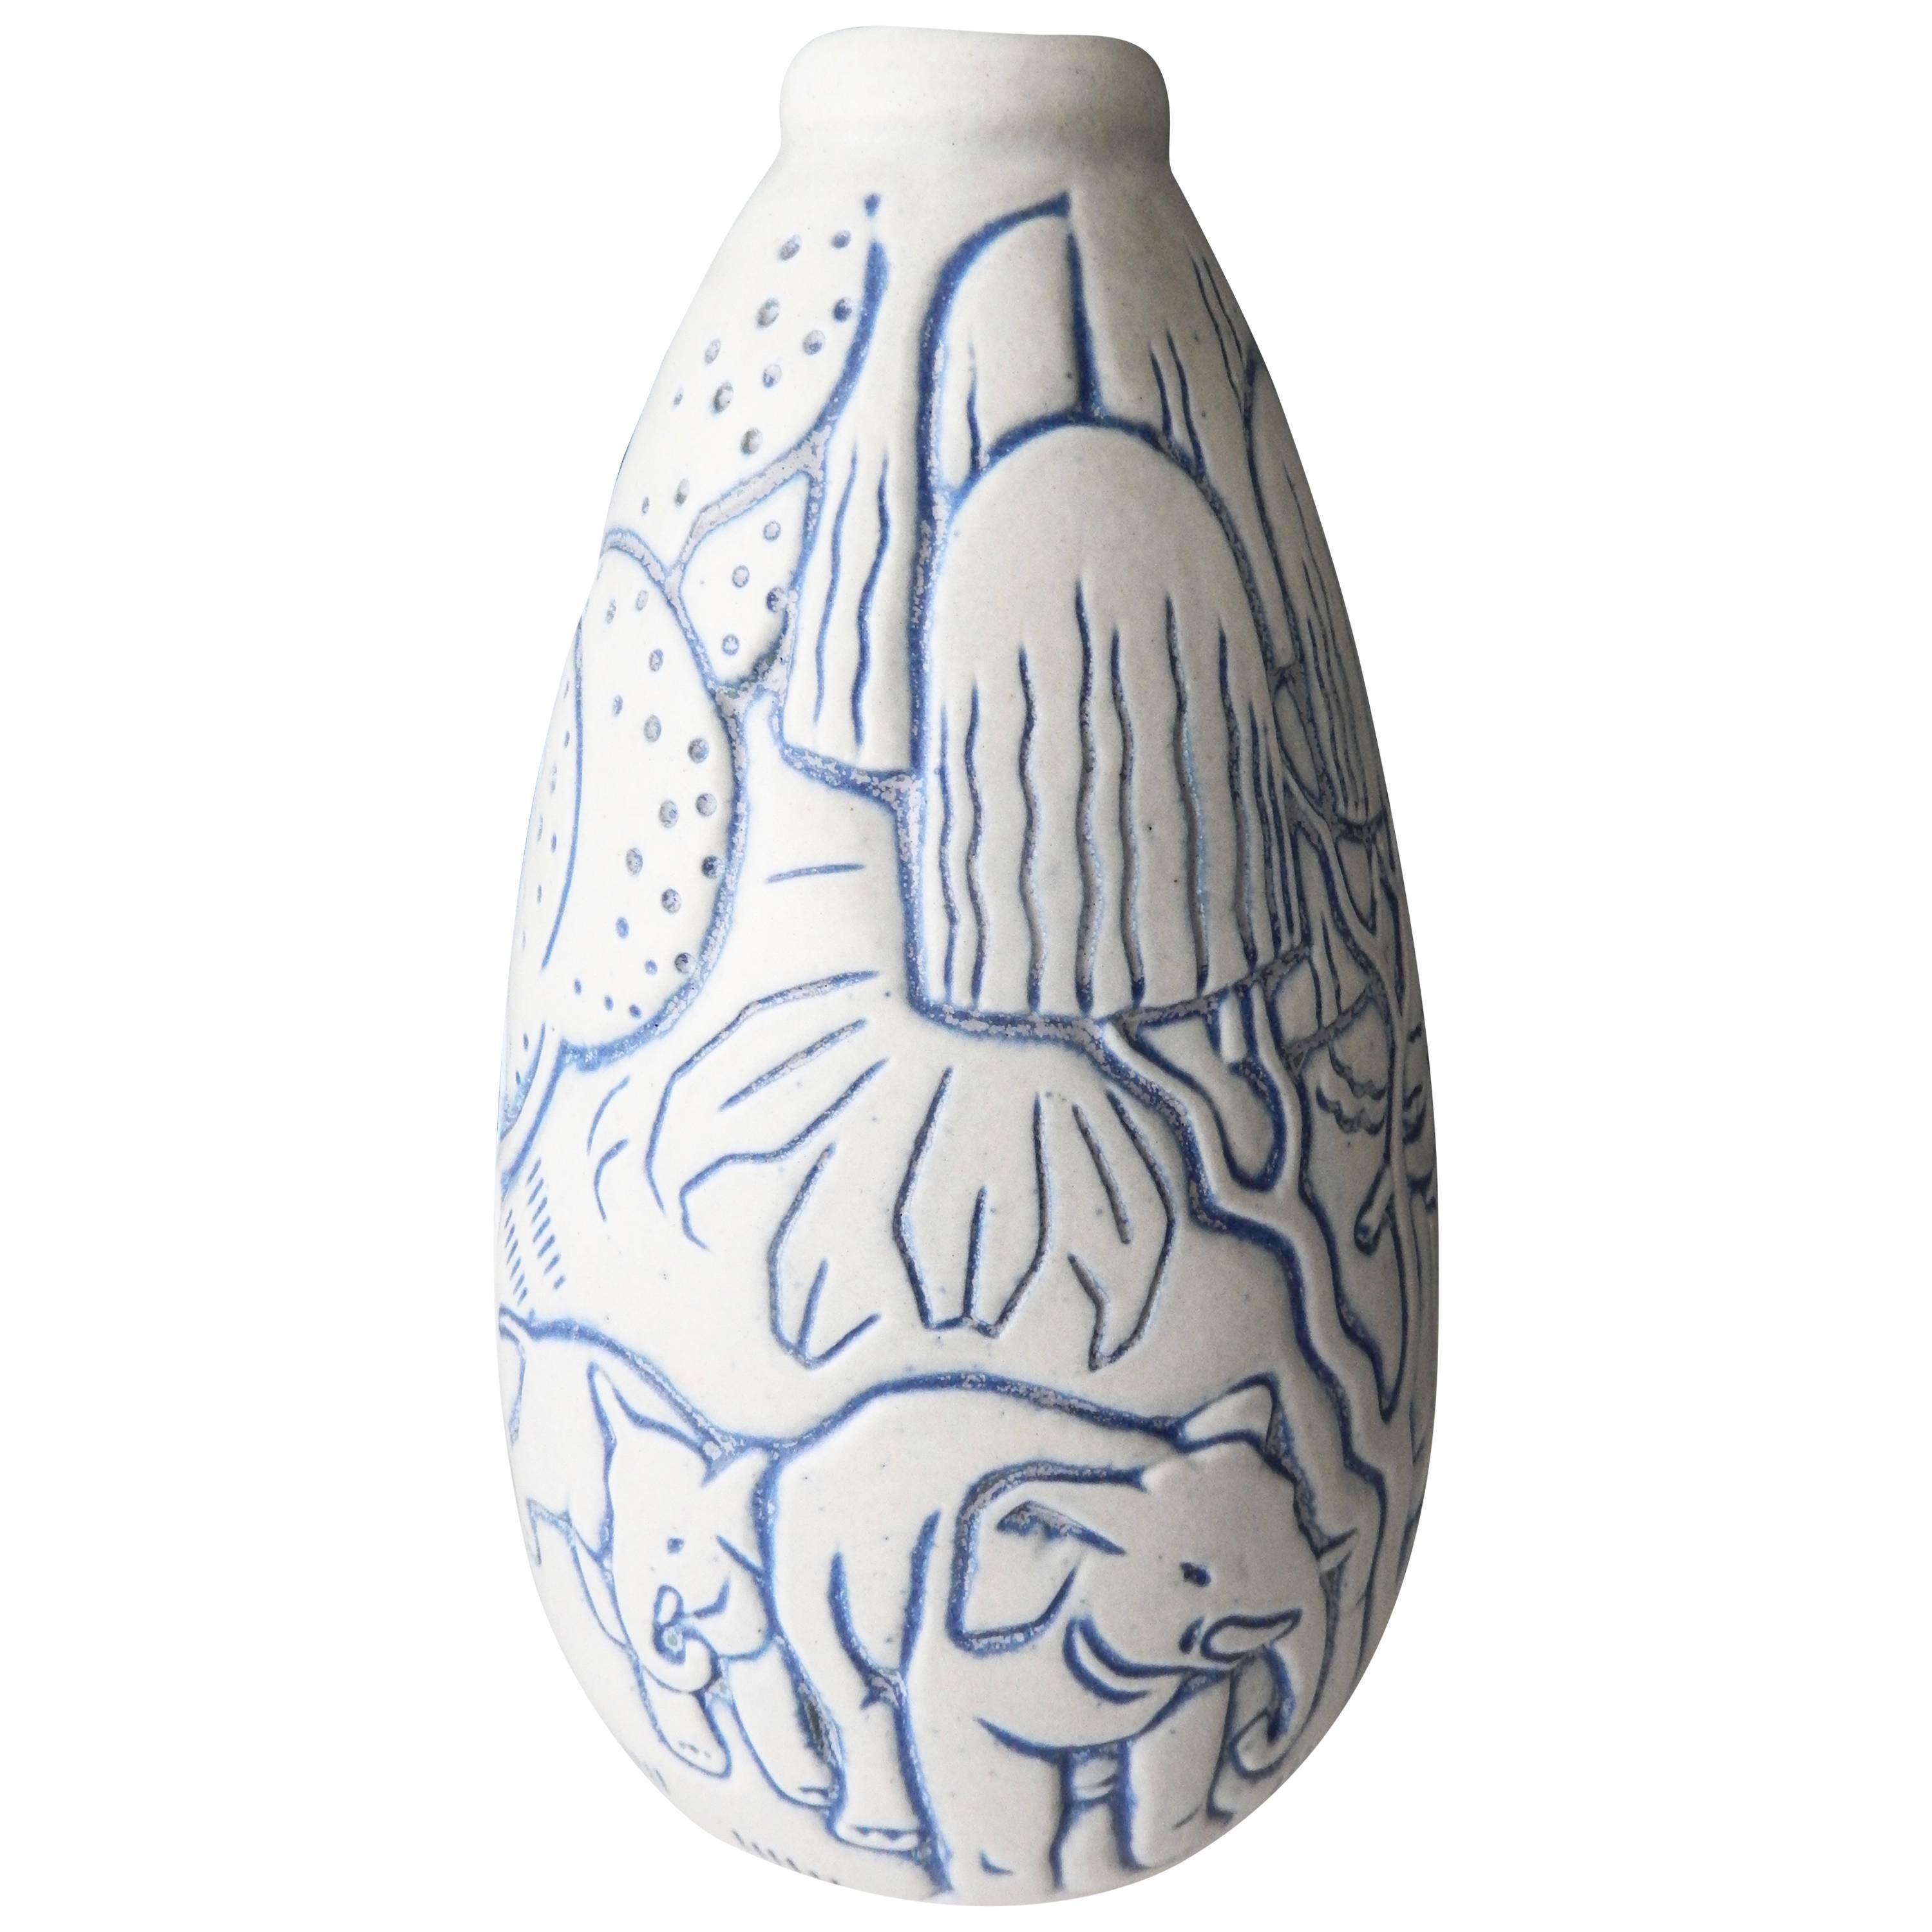 Tall Art Deco Stoneware Vase by Andre Legrand for Les Freres Mougin, Nancy